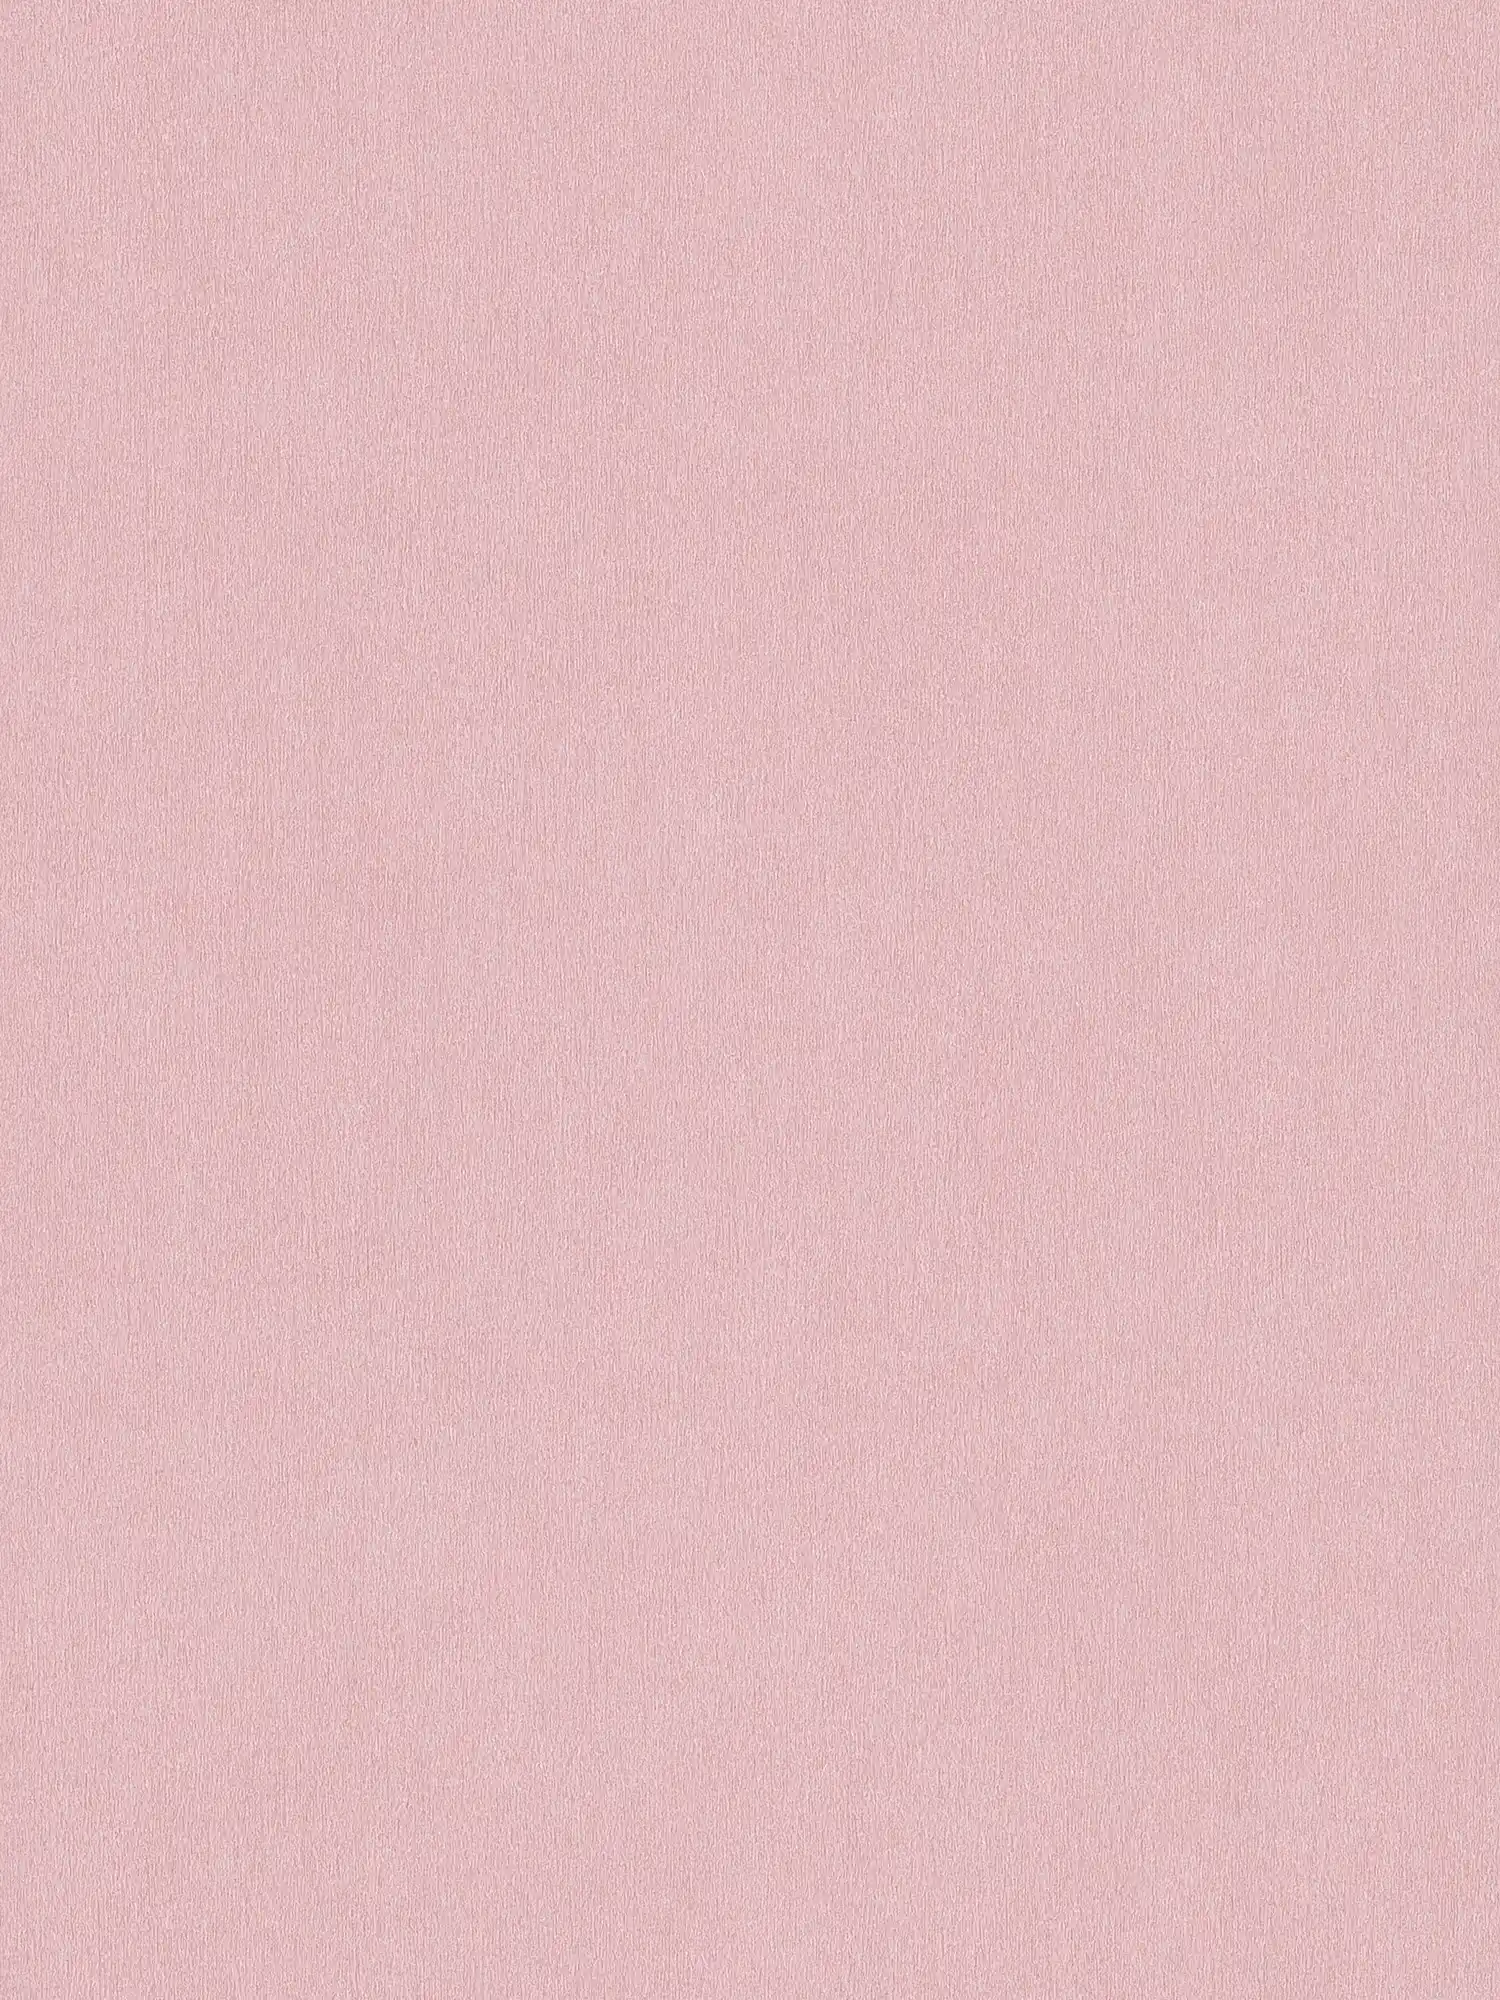 Pink wallpaper plain with colour hatching
